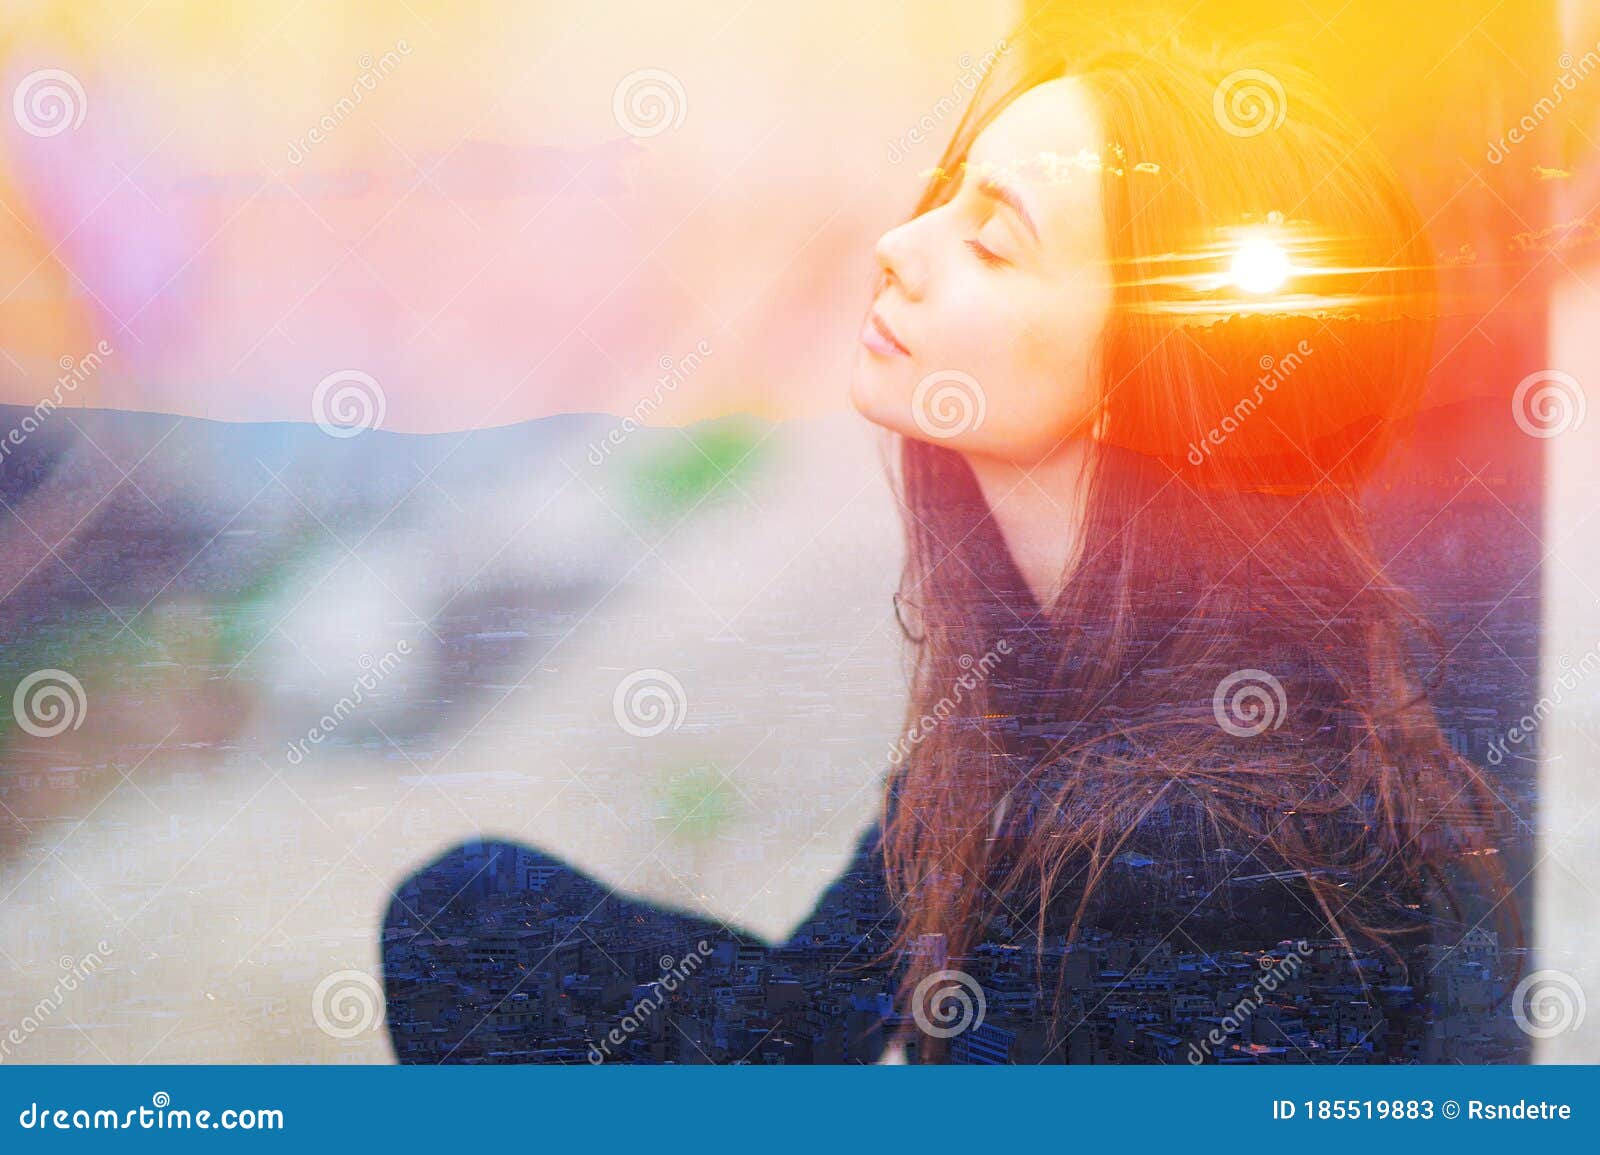 double multiply exposure portrait of a dreamy cute woman meditating outdoors with eyes closed, combined photograph of nature,